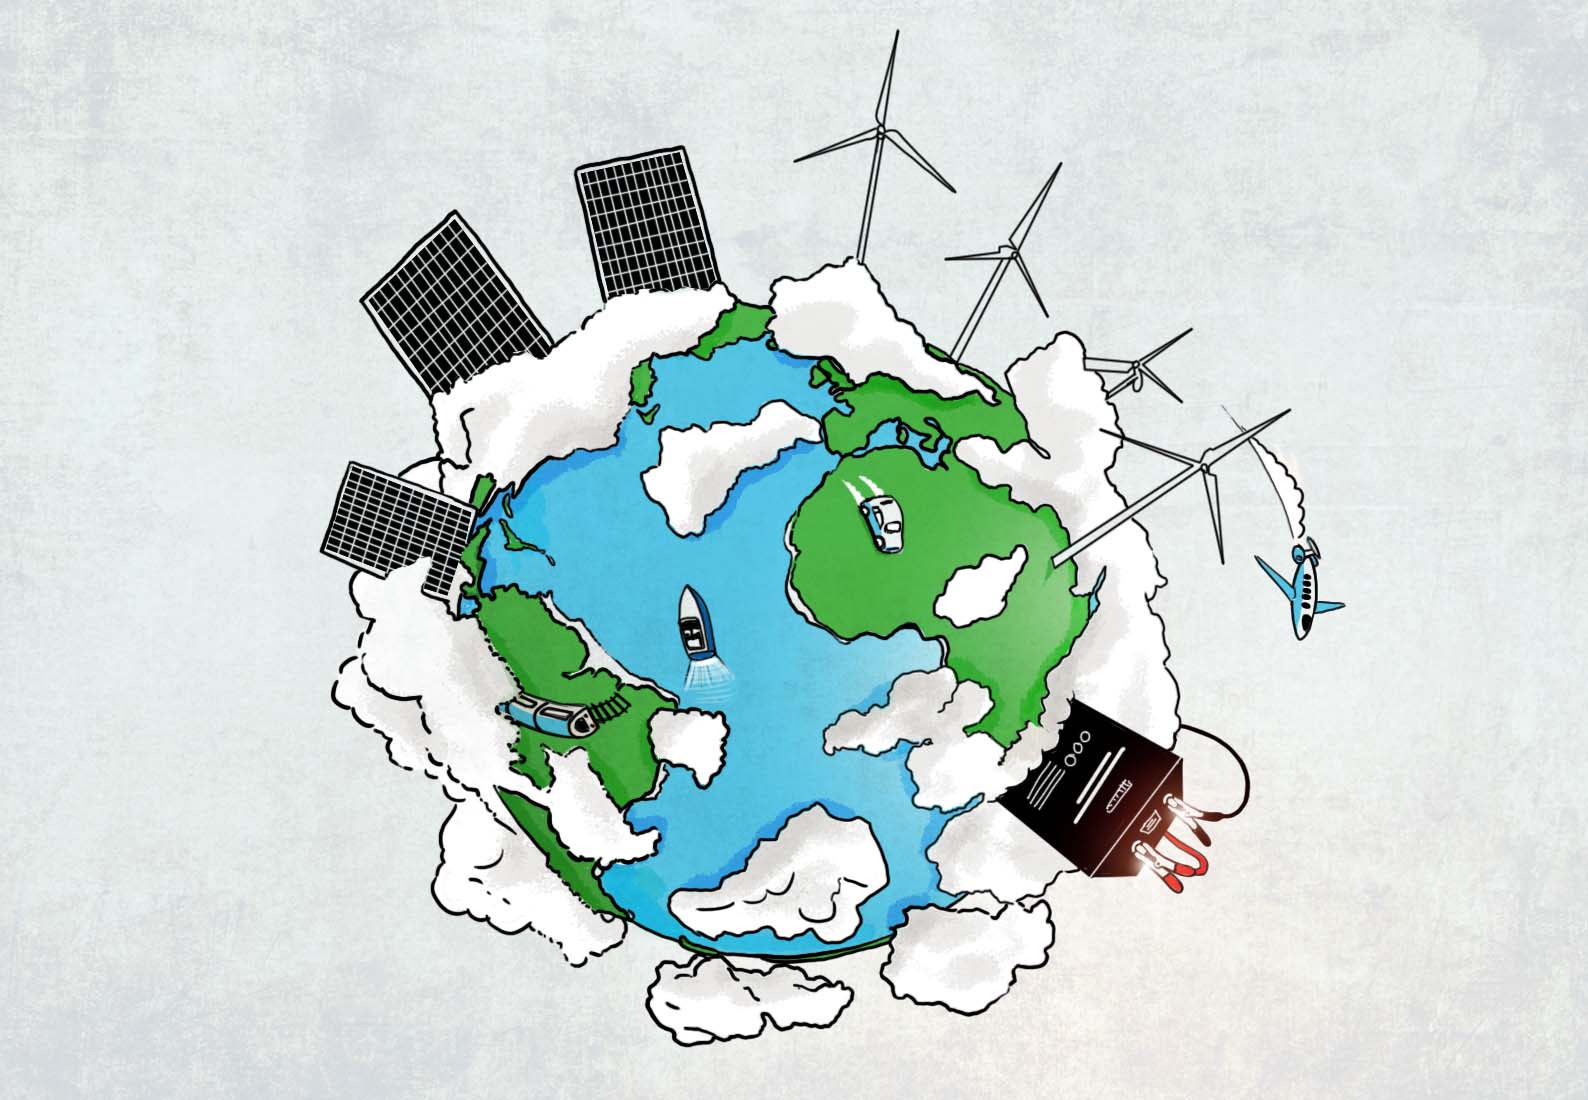 A lithium-ion battery is shown powering a globe with solar panels, wind turbines, cars and boats.